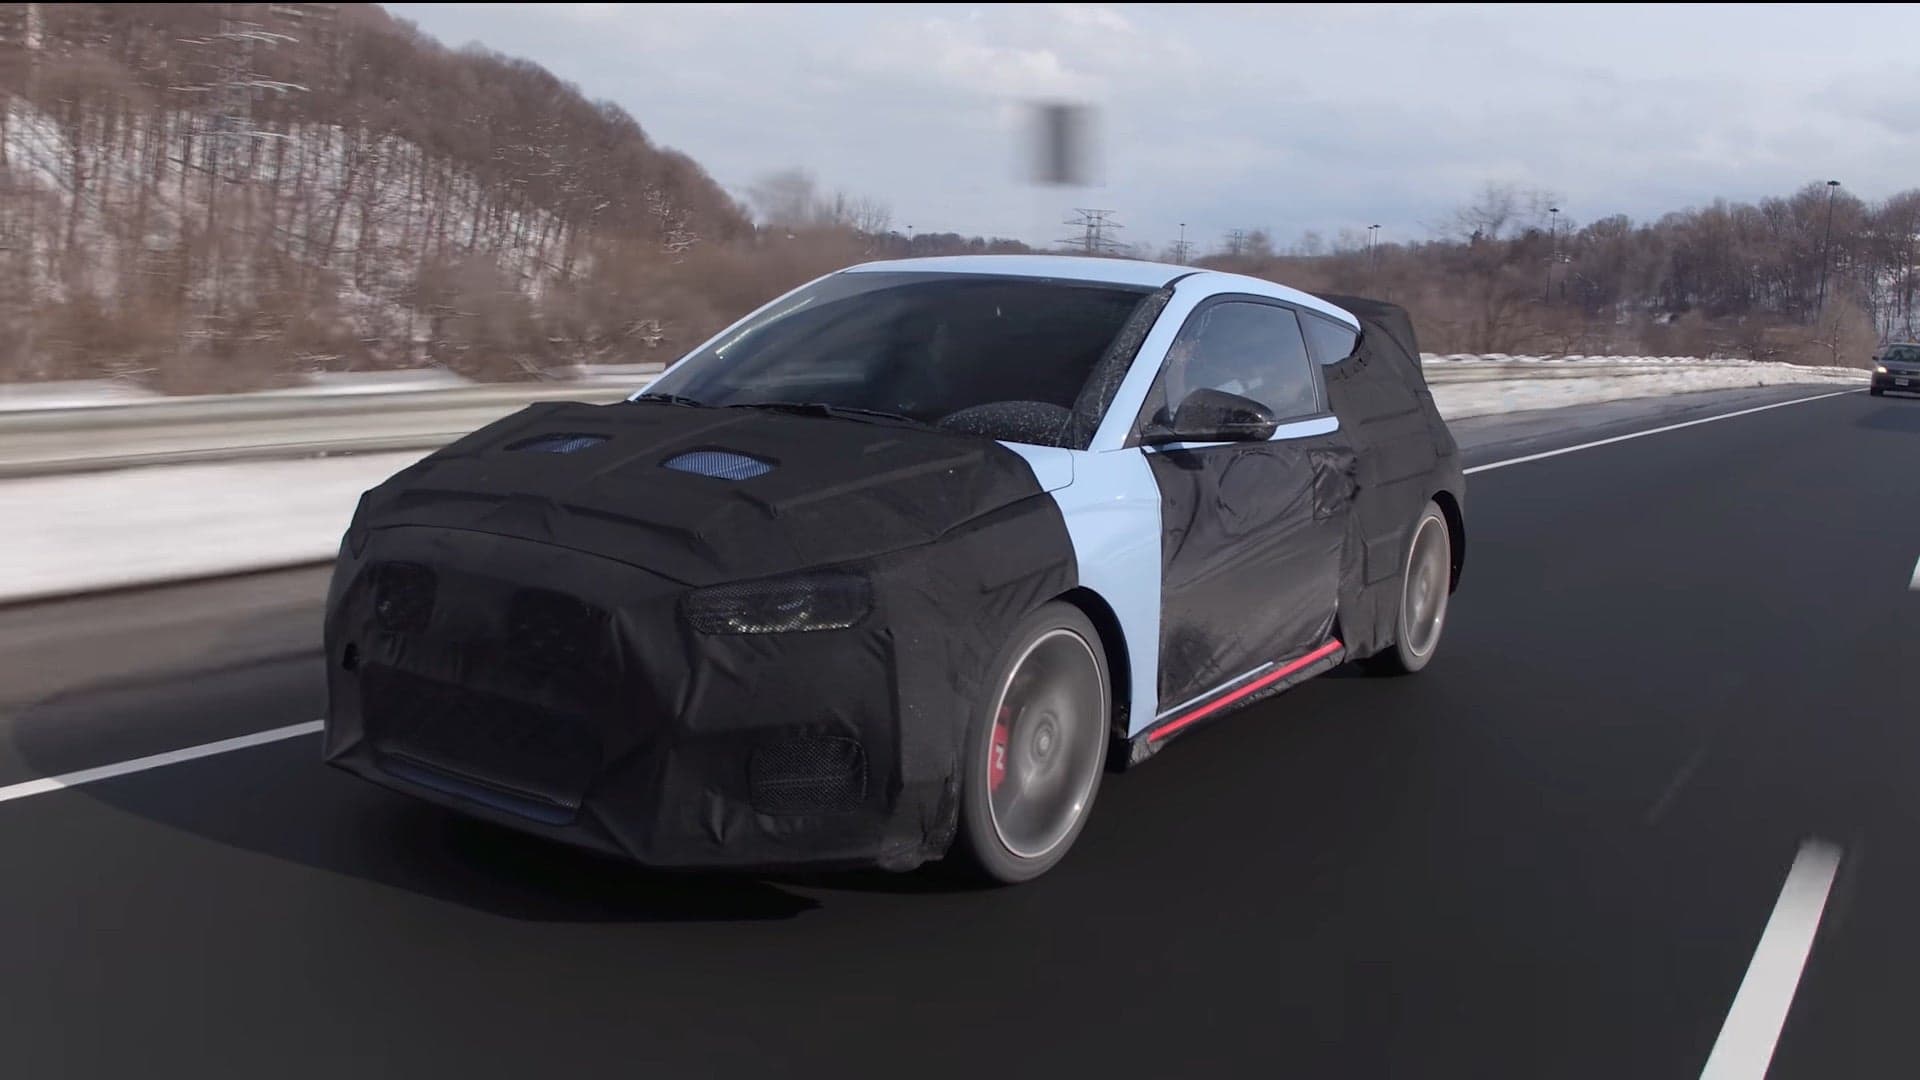 Listen to the Pre-Production Hyundai Veloster N’s Crazy Exhaust Sounds